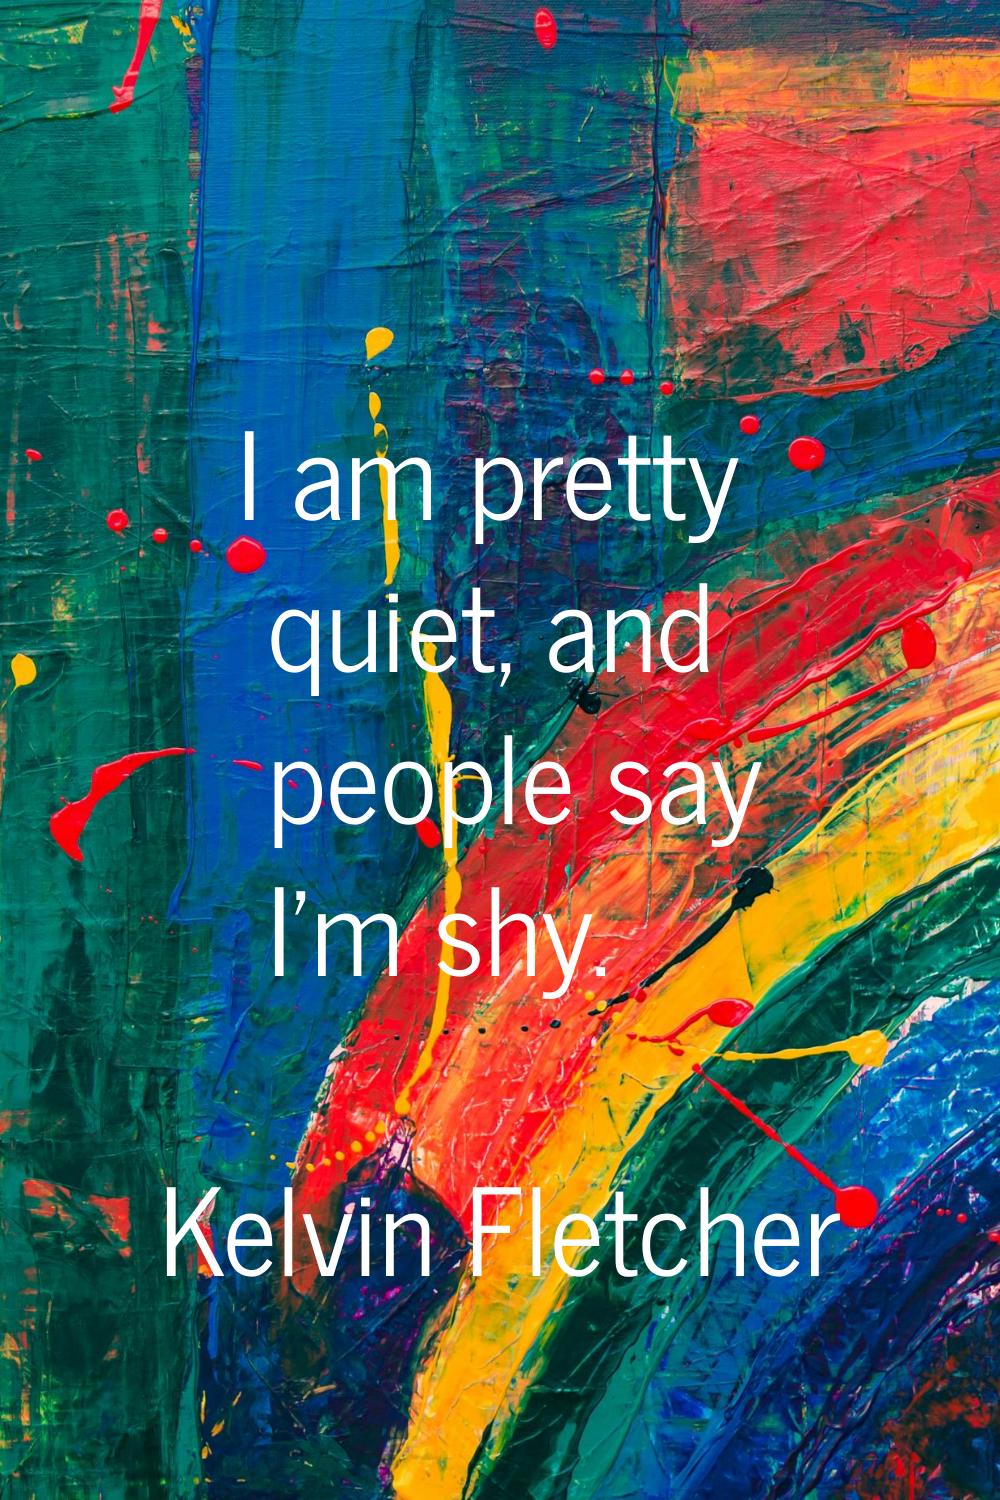 I am pretty quiet, and people say I'm shy.